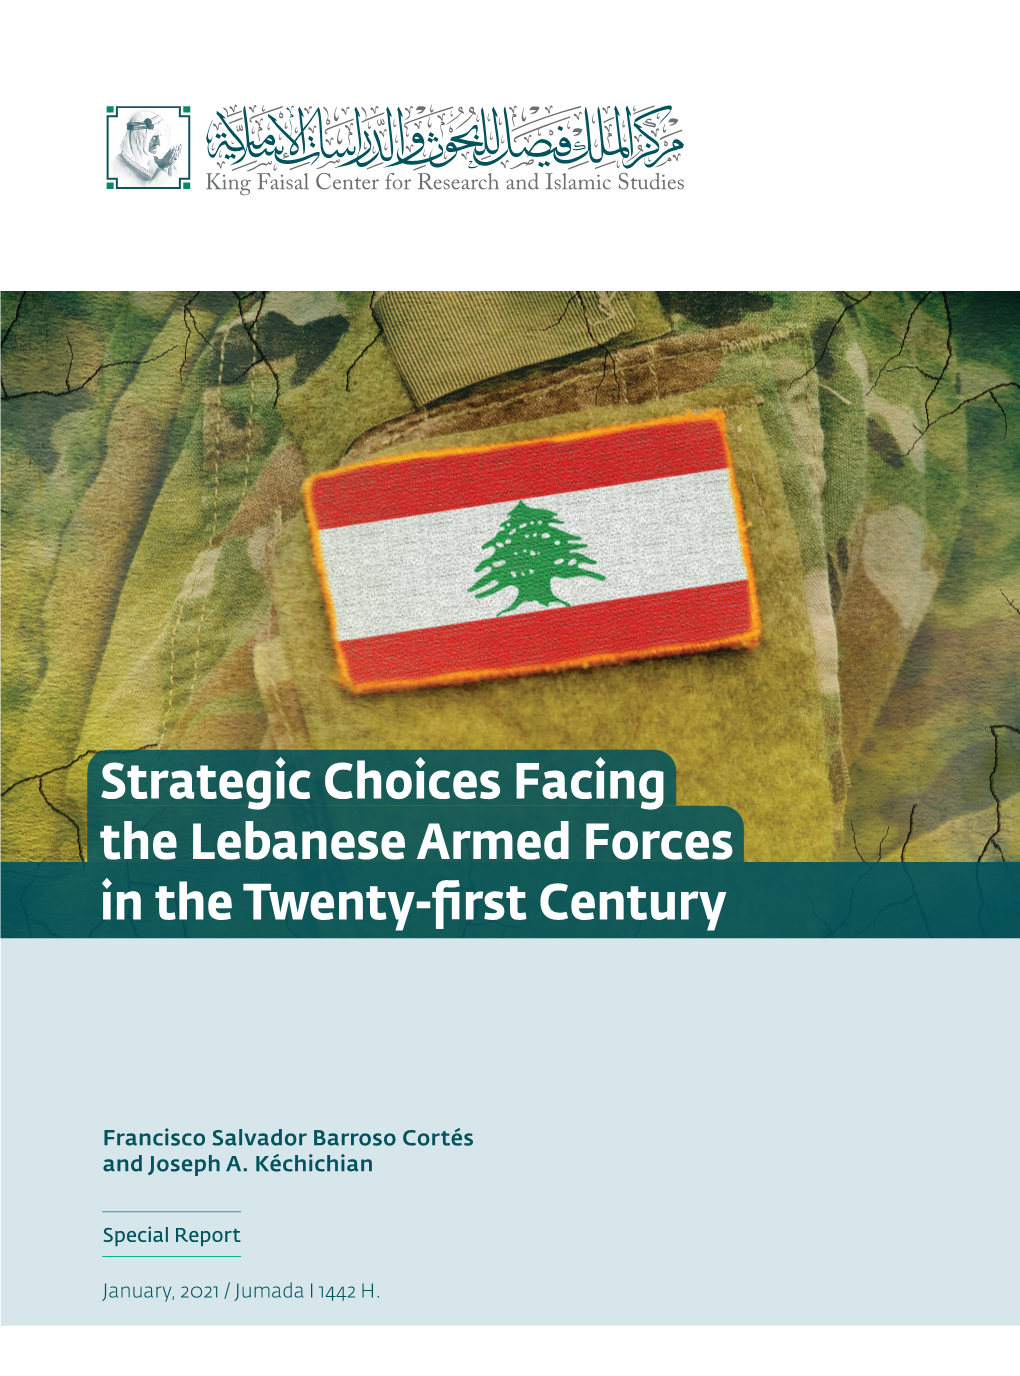 Strategic Choices Facing the Lebanese Armed Forces in the Twenty-First Century